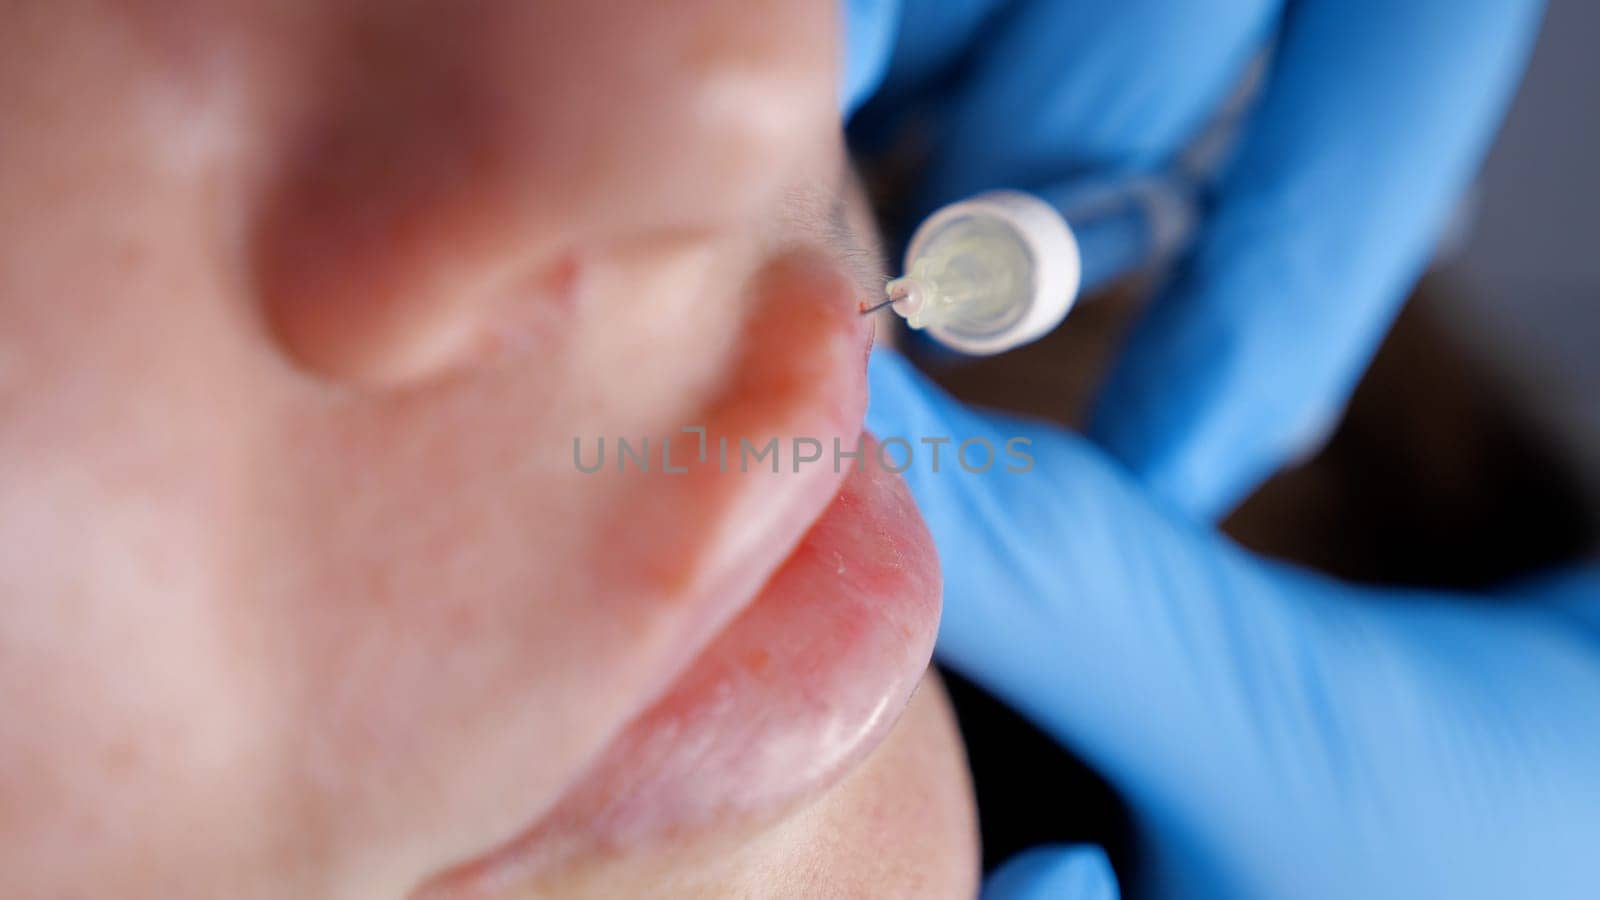 close-up, female face. Surgeon, in medical gloves, carefully and slowly injects hyaluronic acid into woman's lips with a syringe. lip augmentation procedure. beauty injections. Plastic surgery